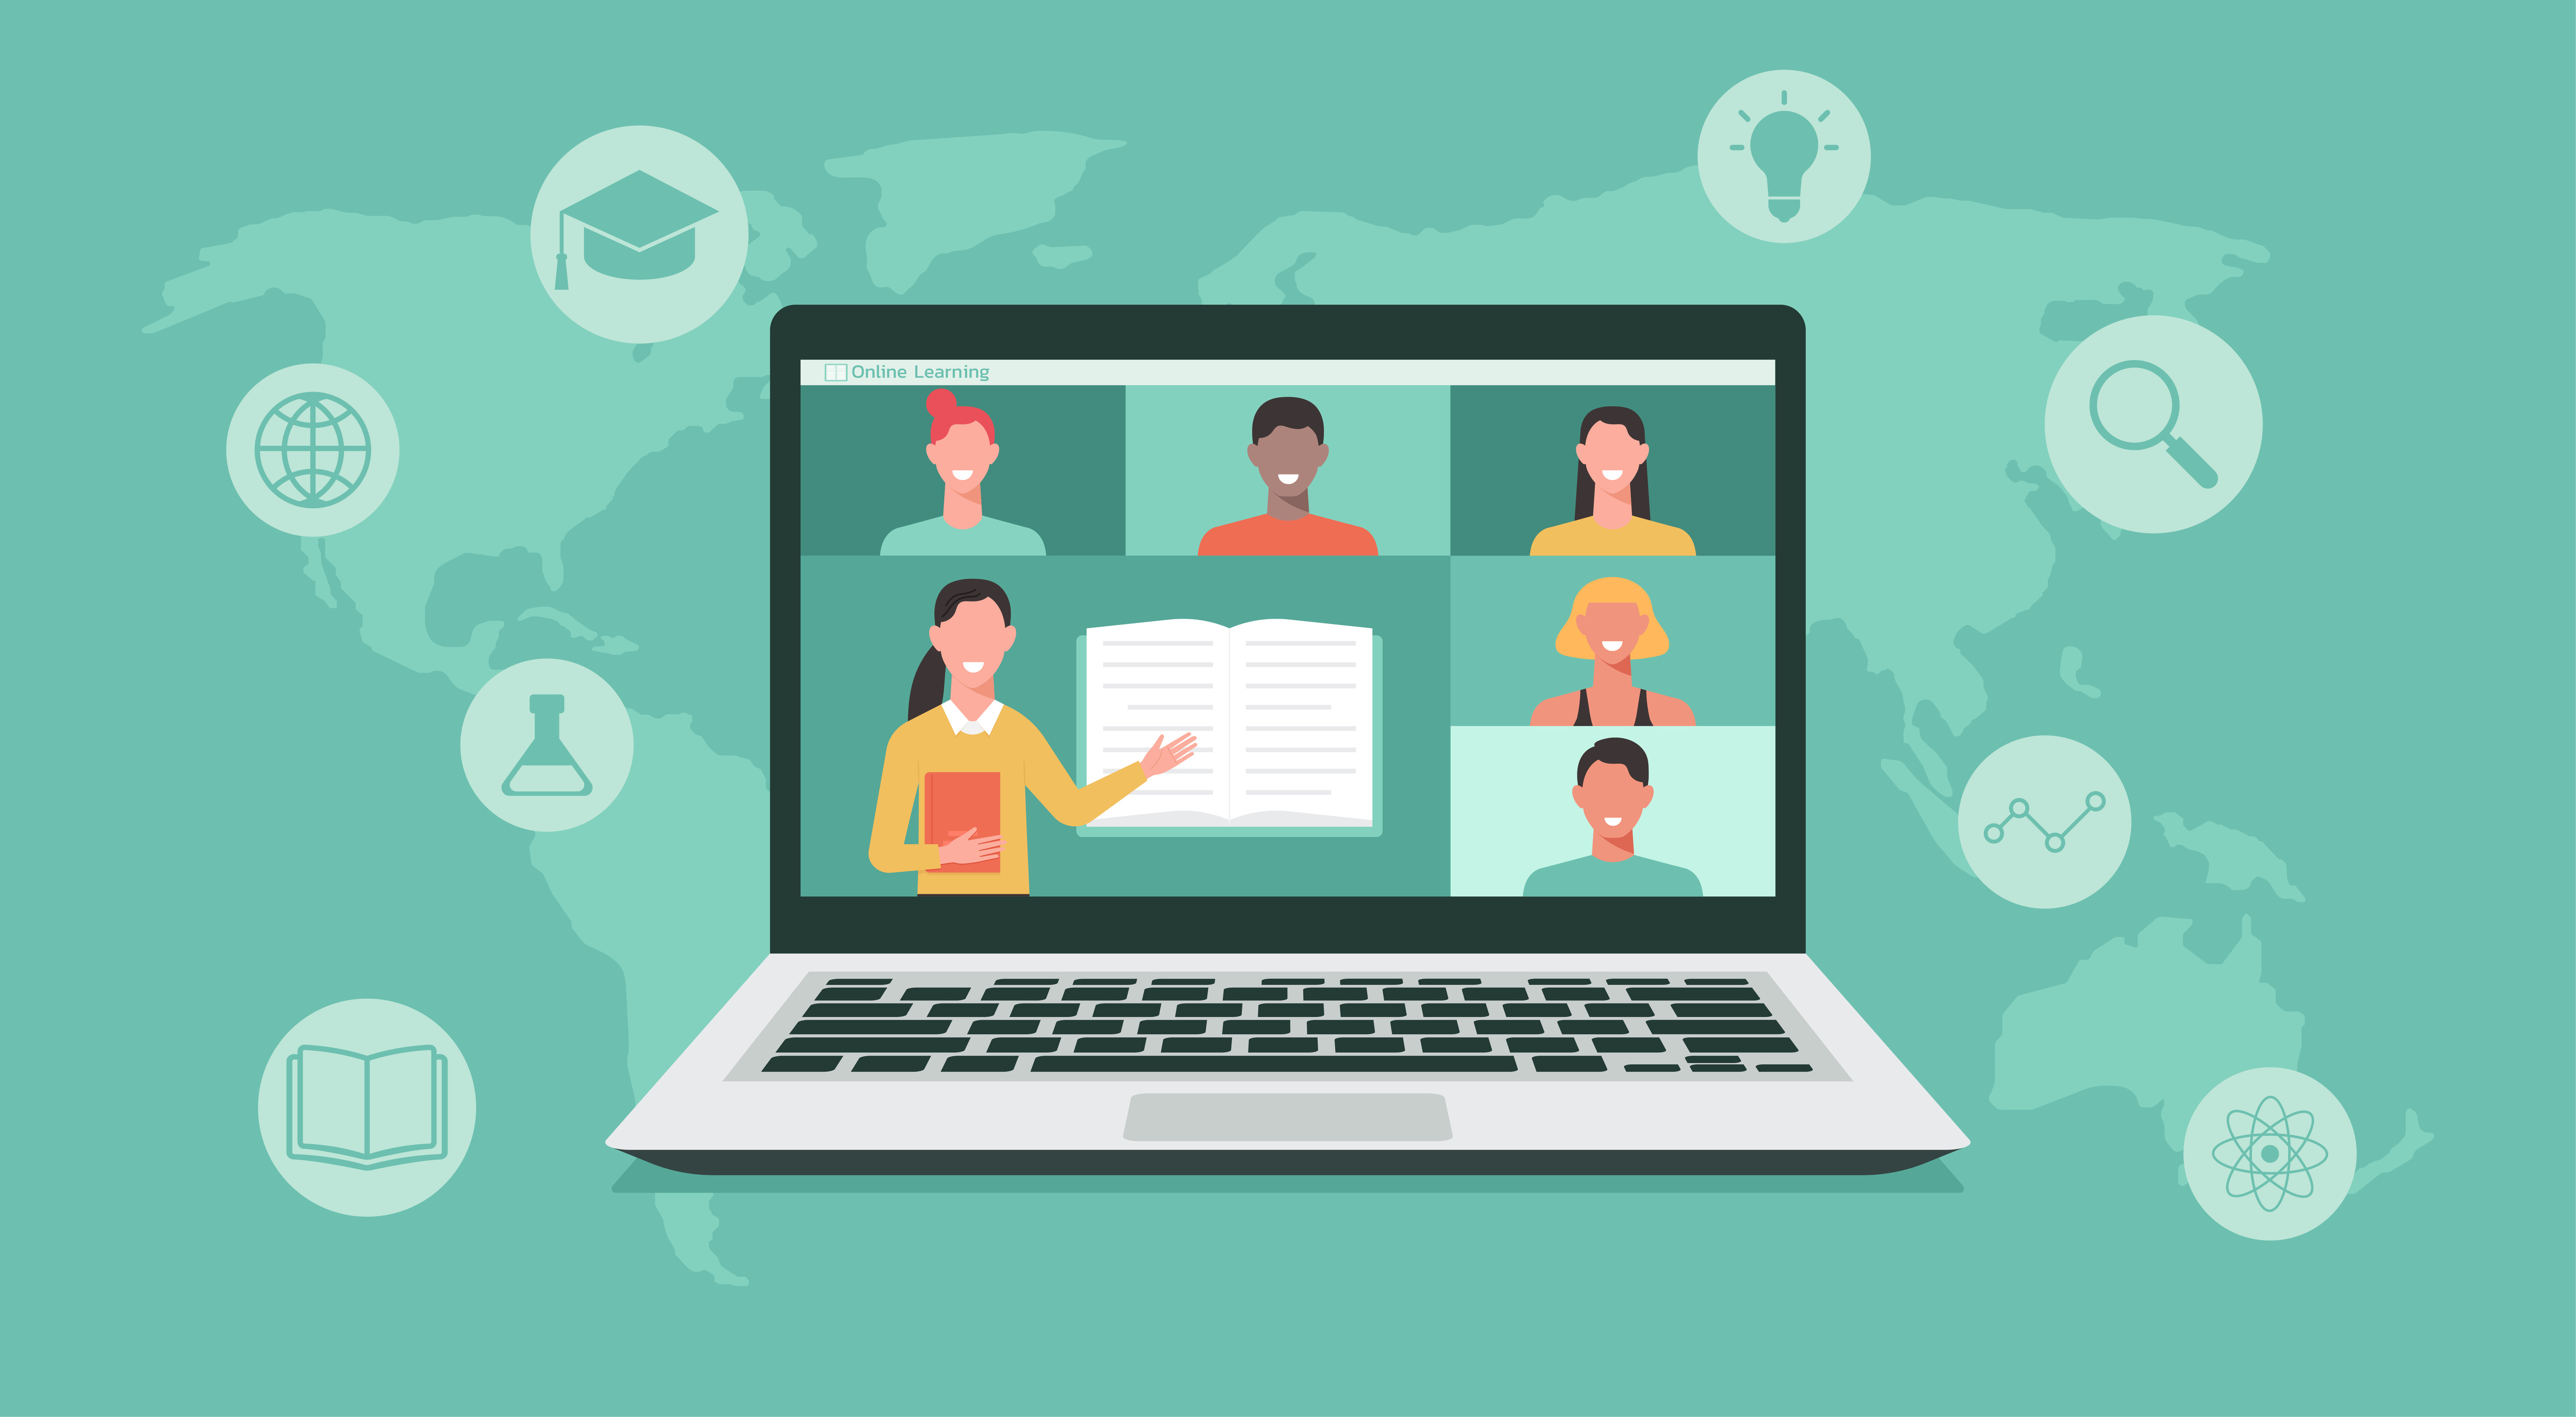 illustration showing student and instructor faces in video conferences on a laptop screen with a world map background; includes icons of graduation hat, lightbulb, magnifying glass, book, and globe, and science symbols